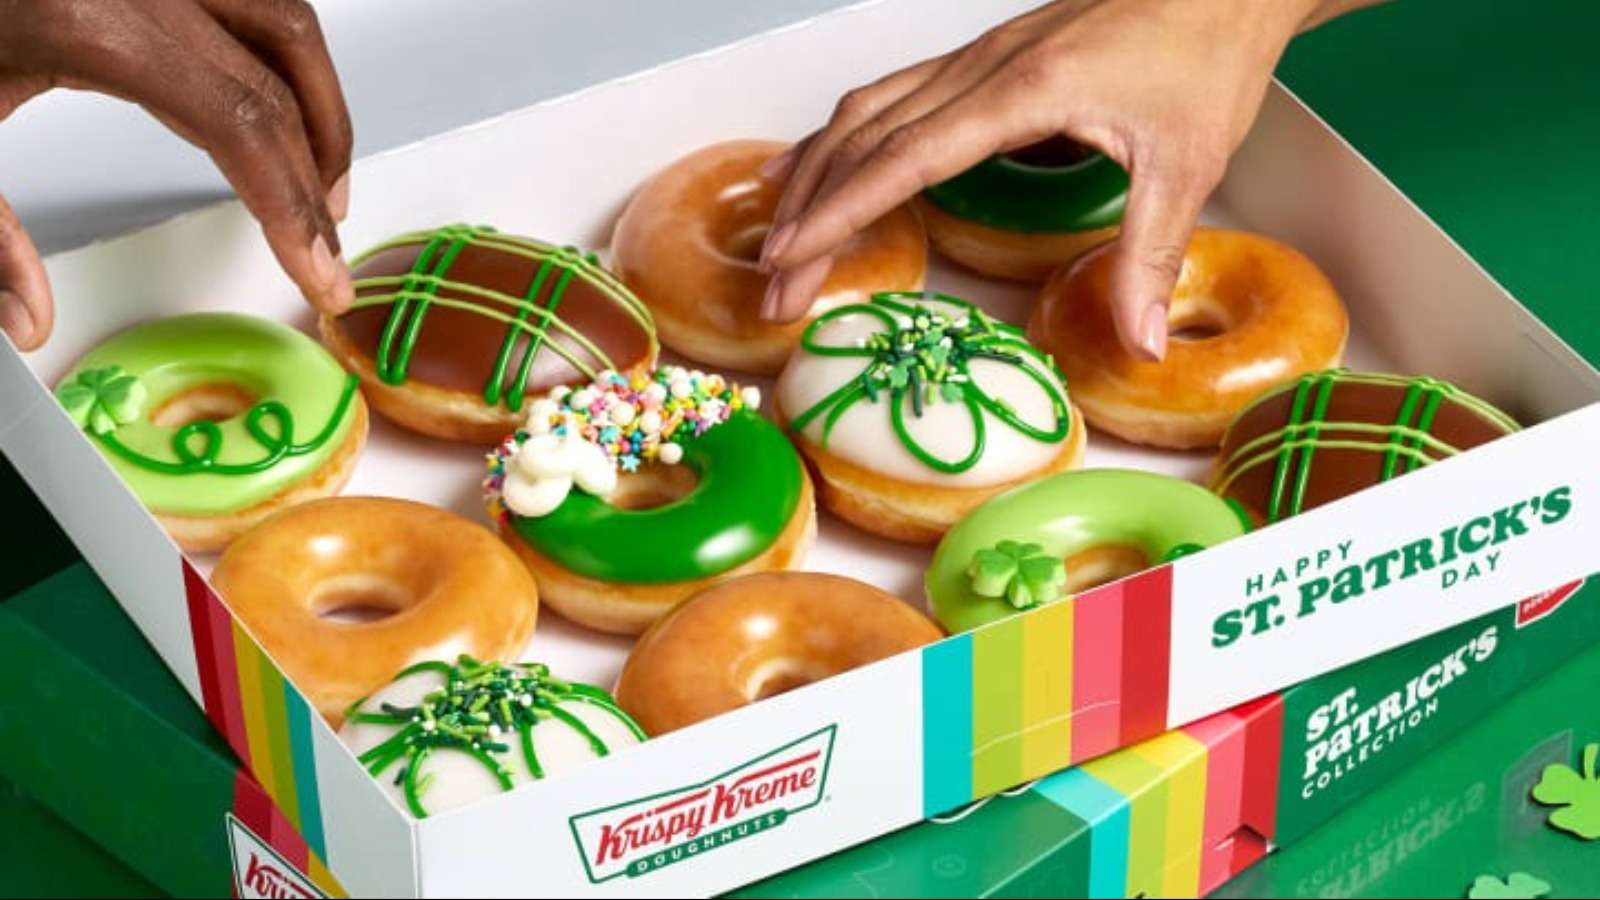 A photo of two people's hands reaching for donut's from a box of twelve donuts